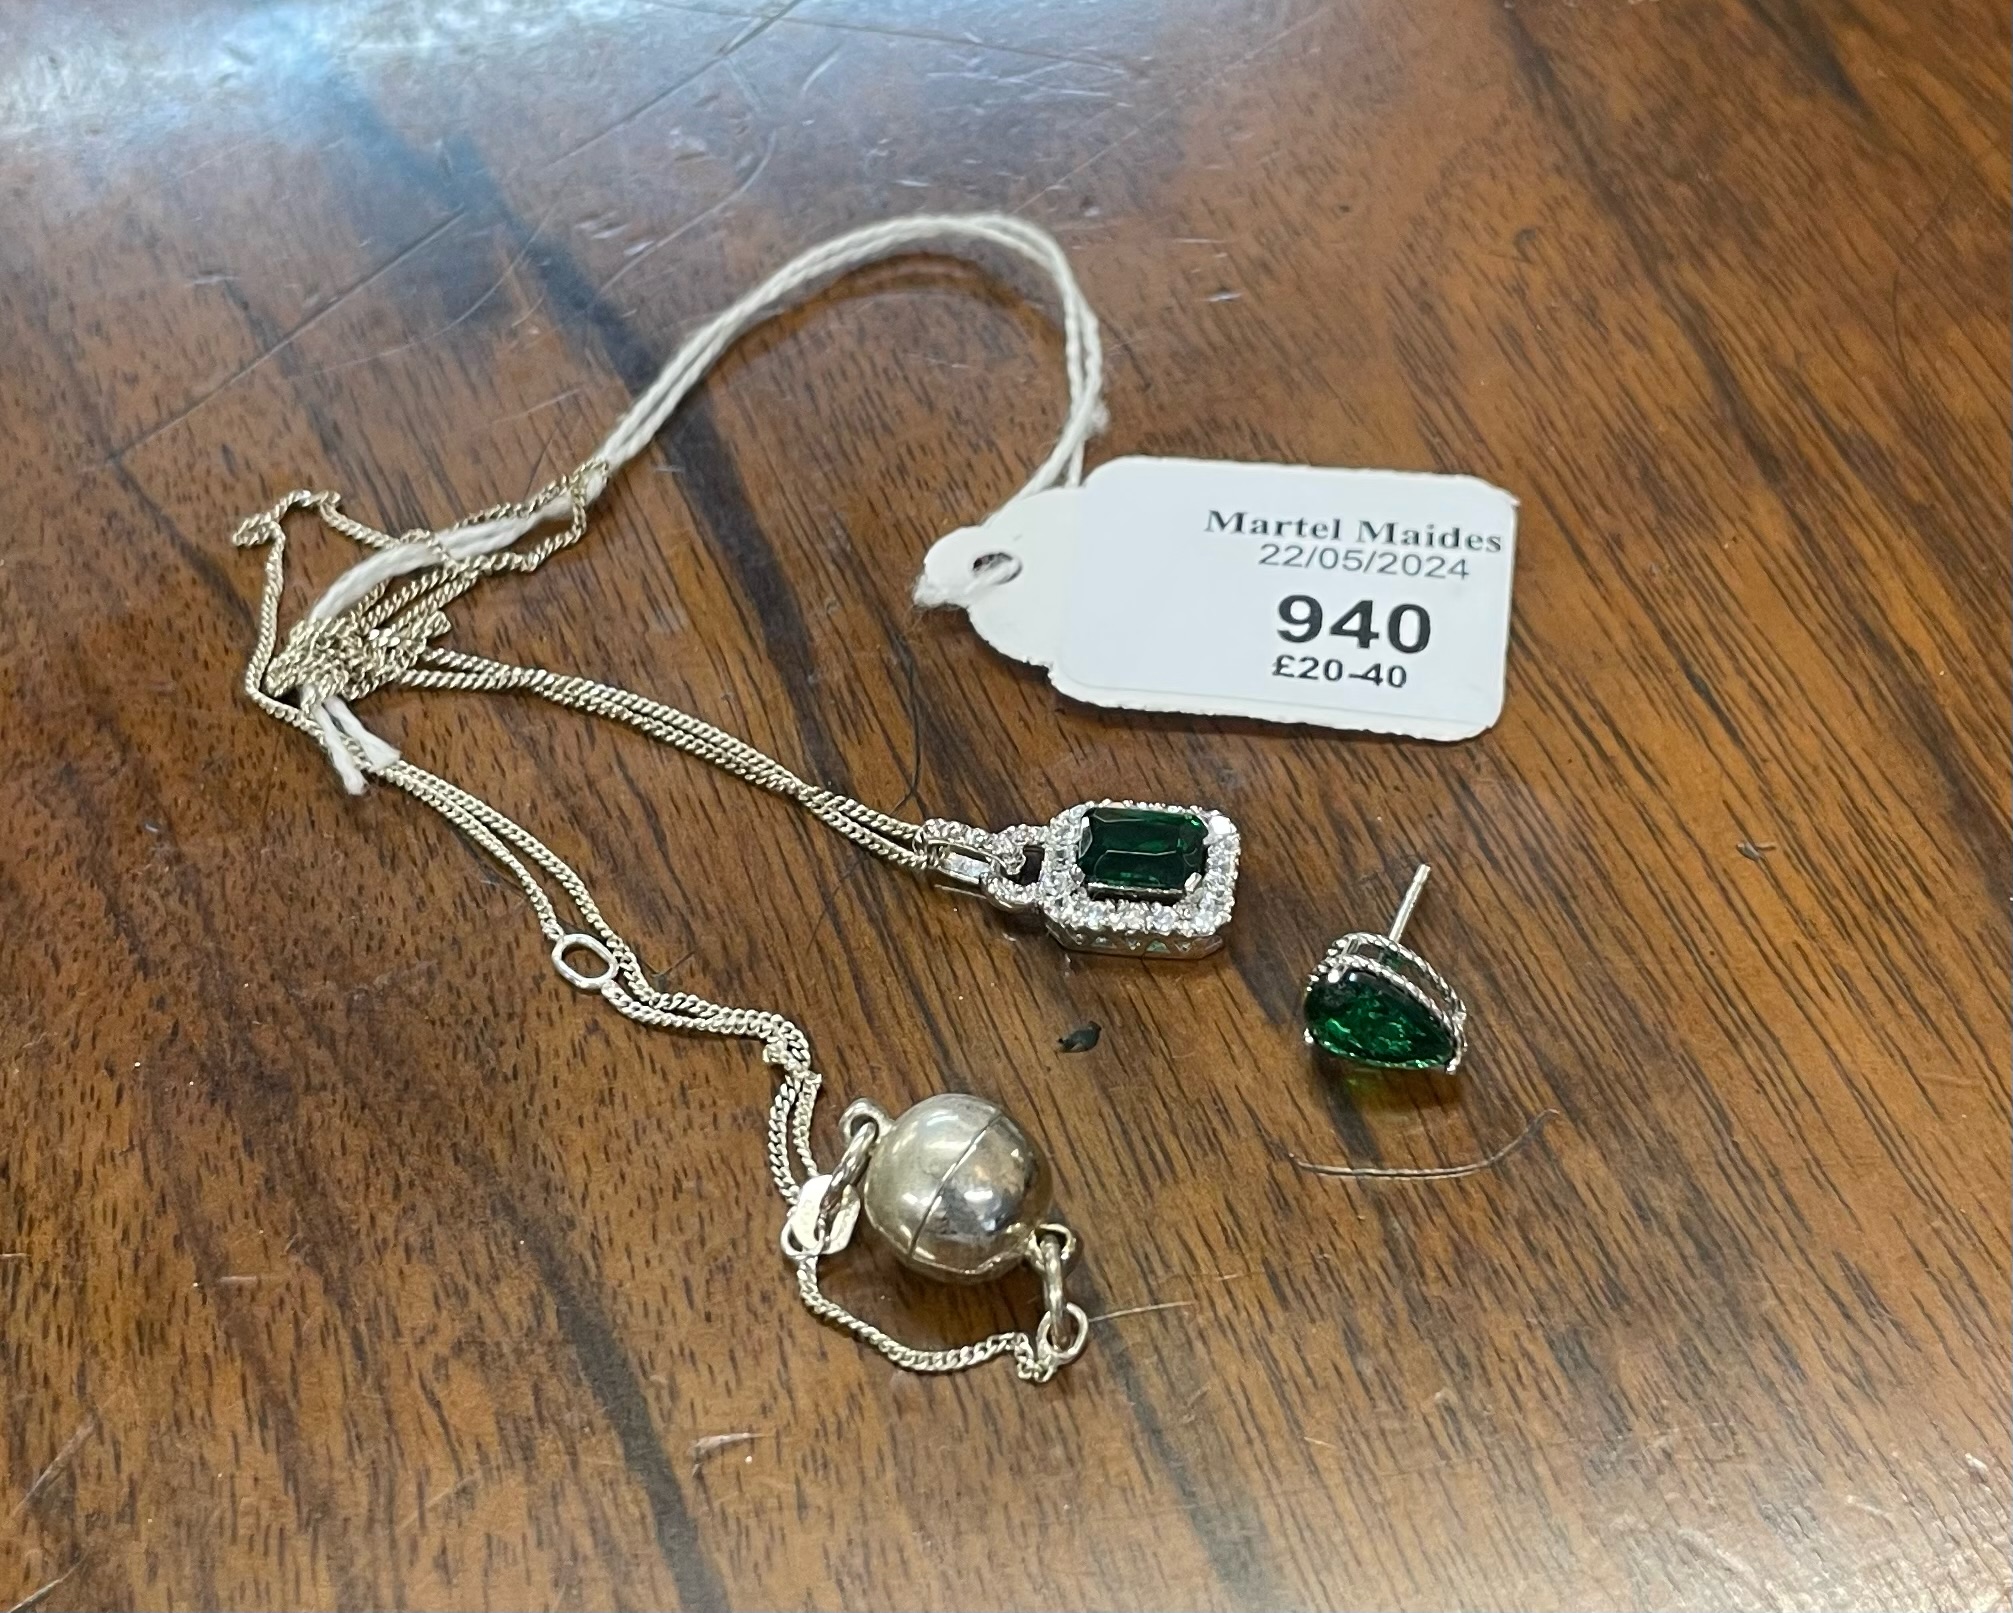 A sterling silver and green gem necklace and matching earrings